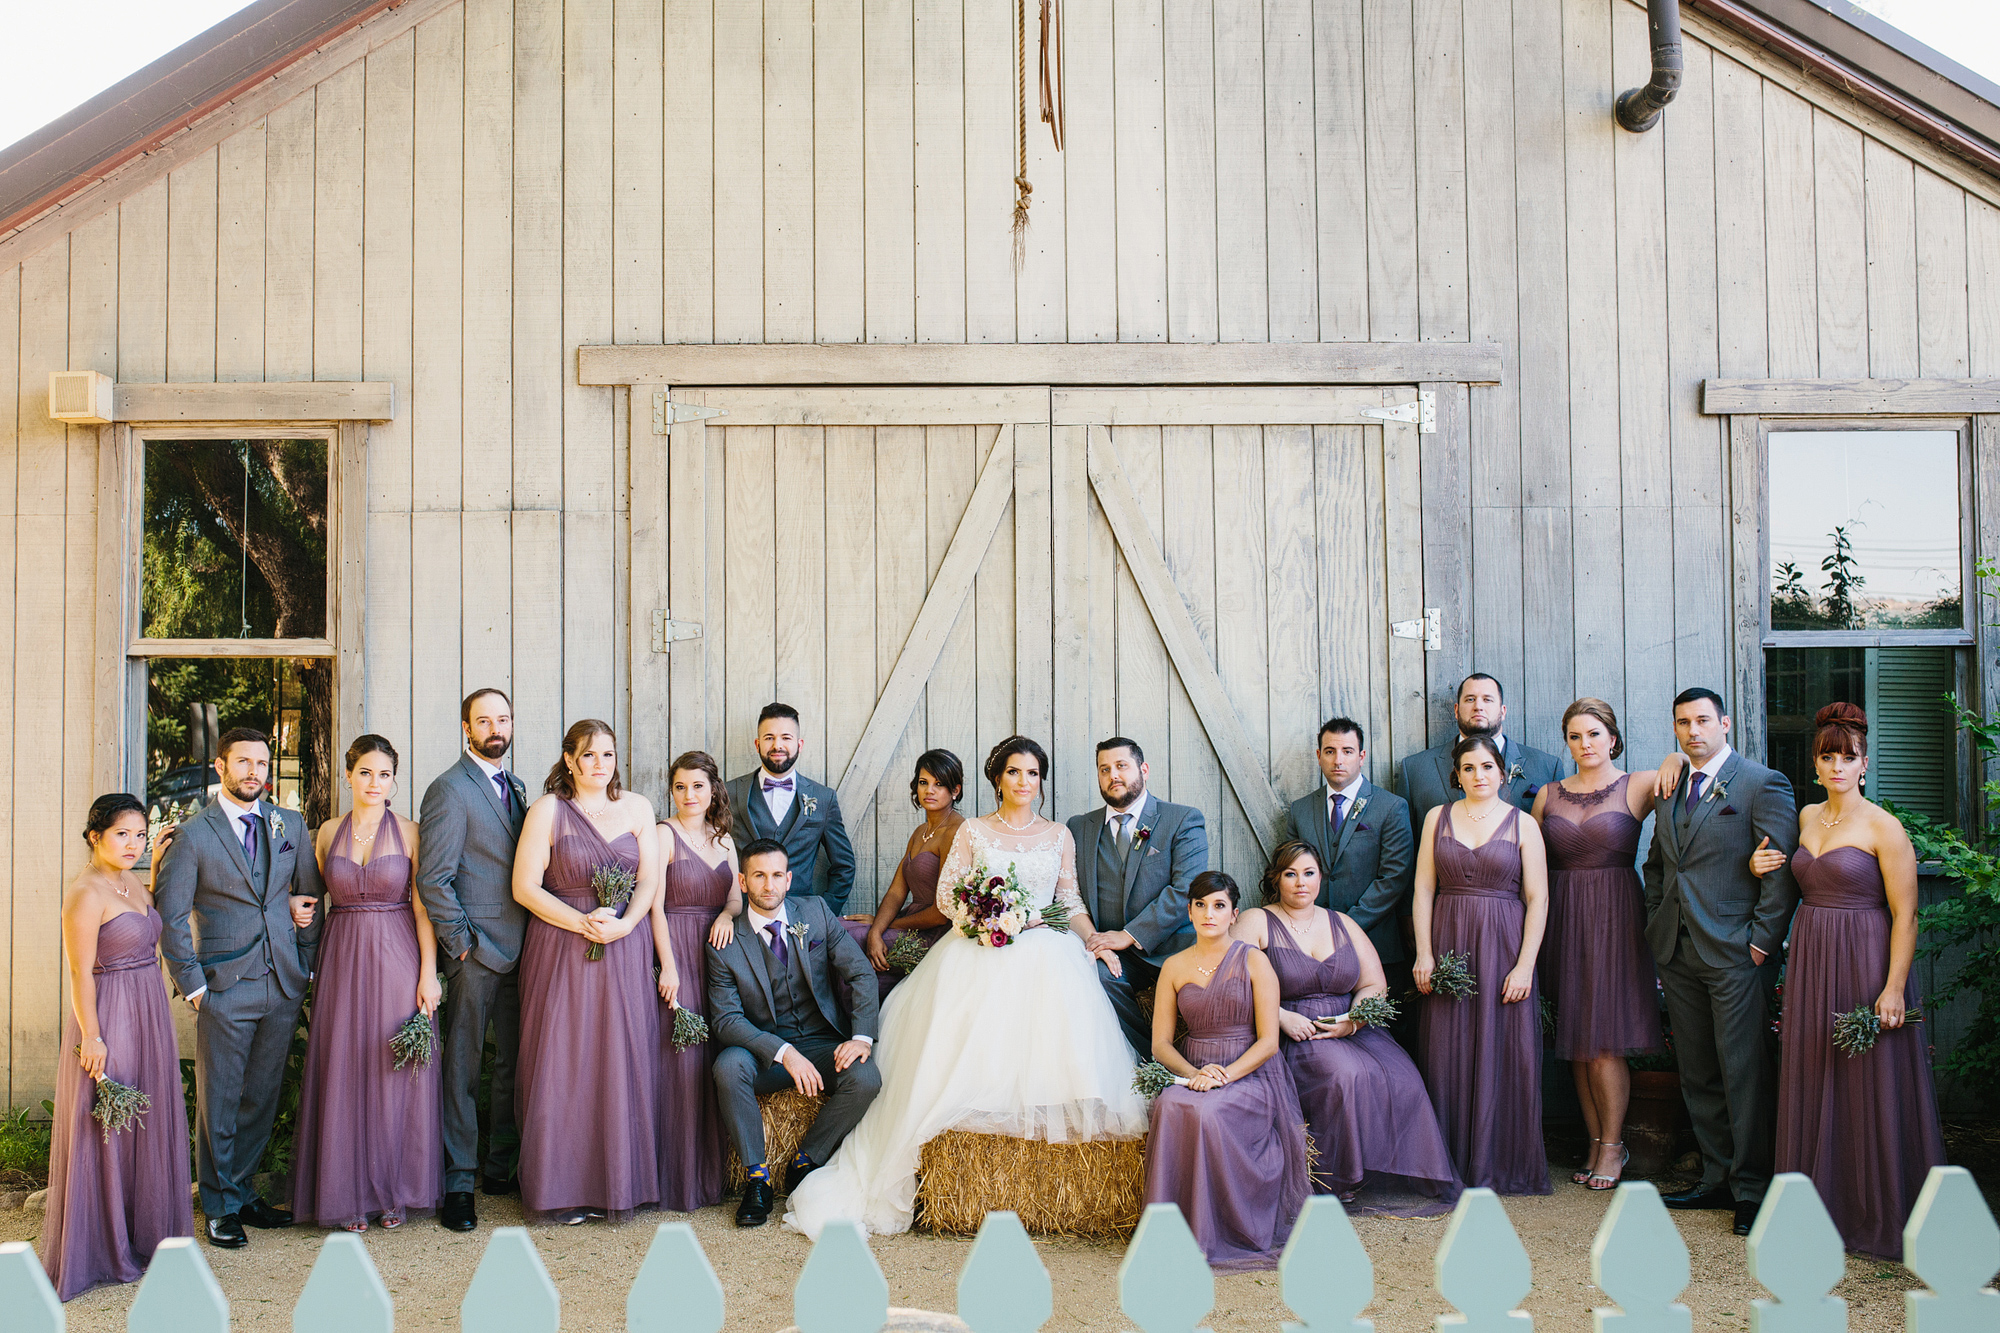 The full wedding party outside of the barn. 